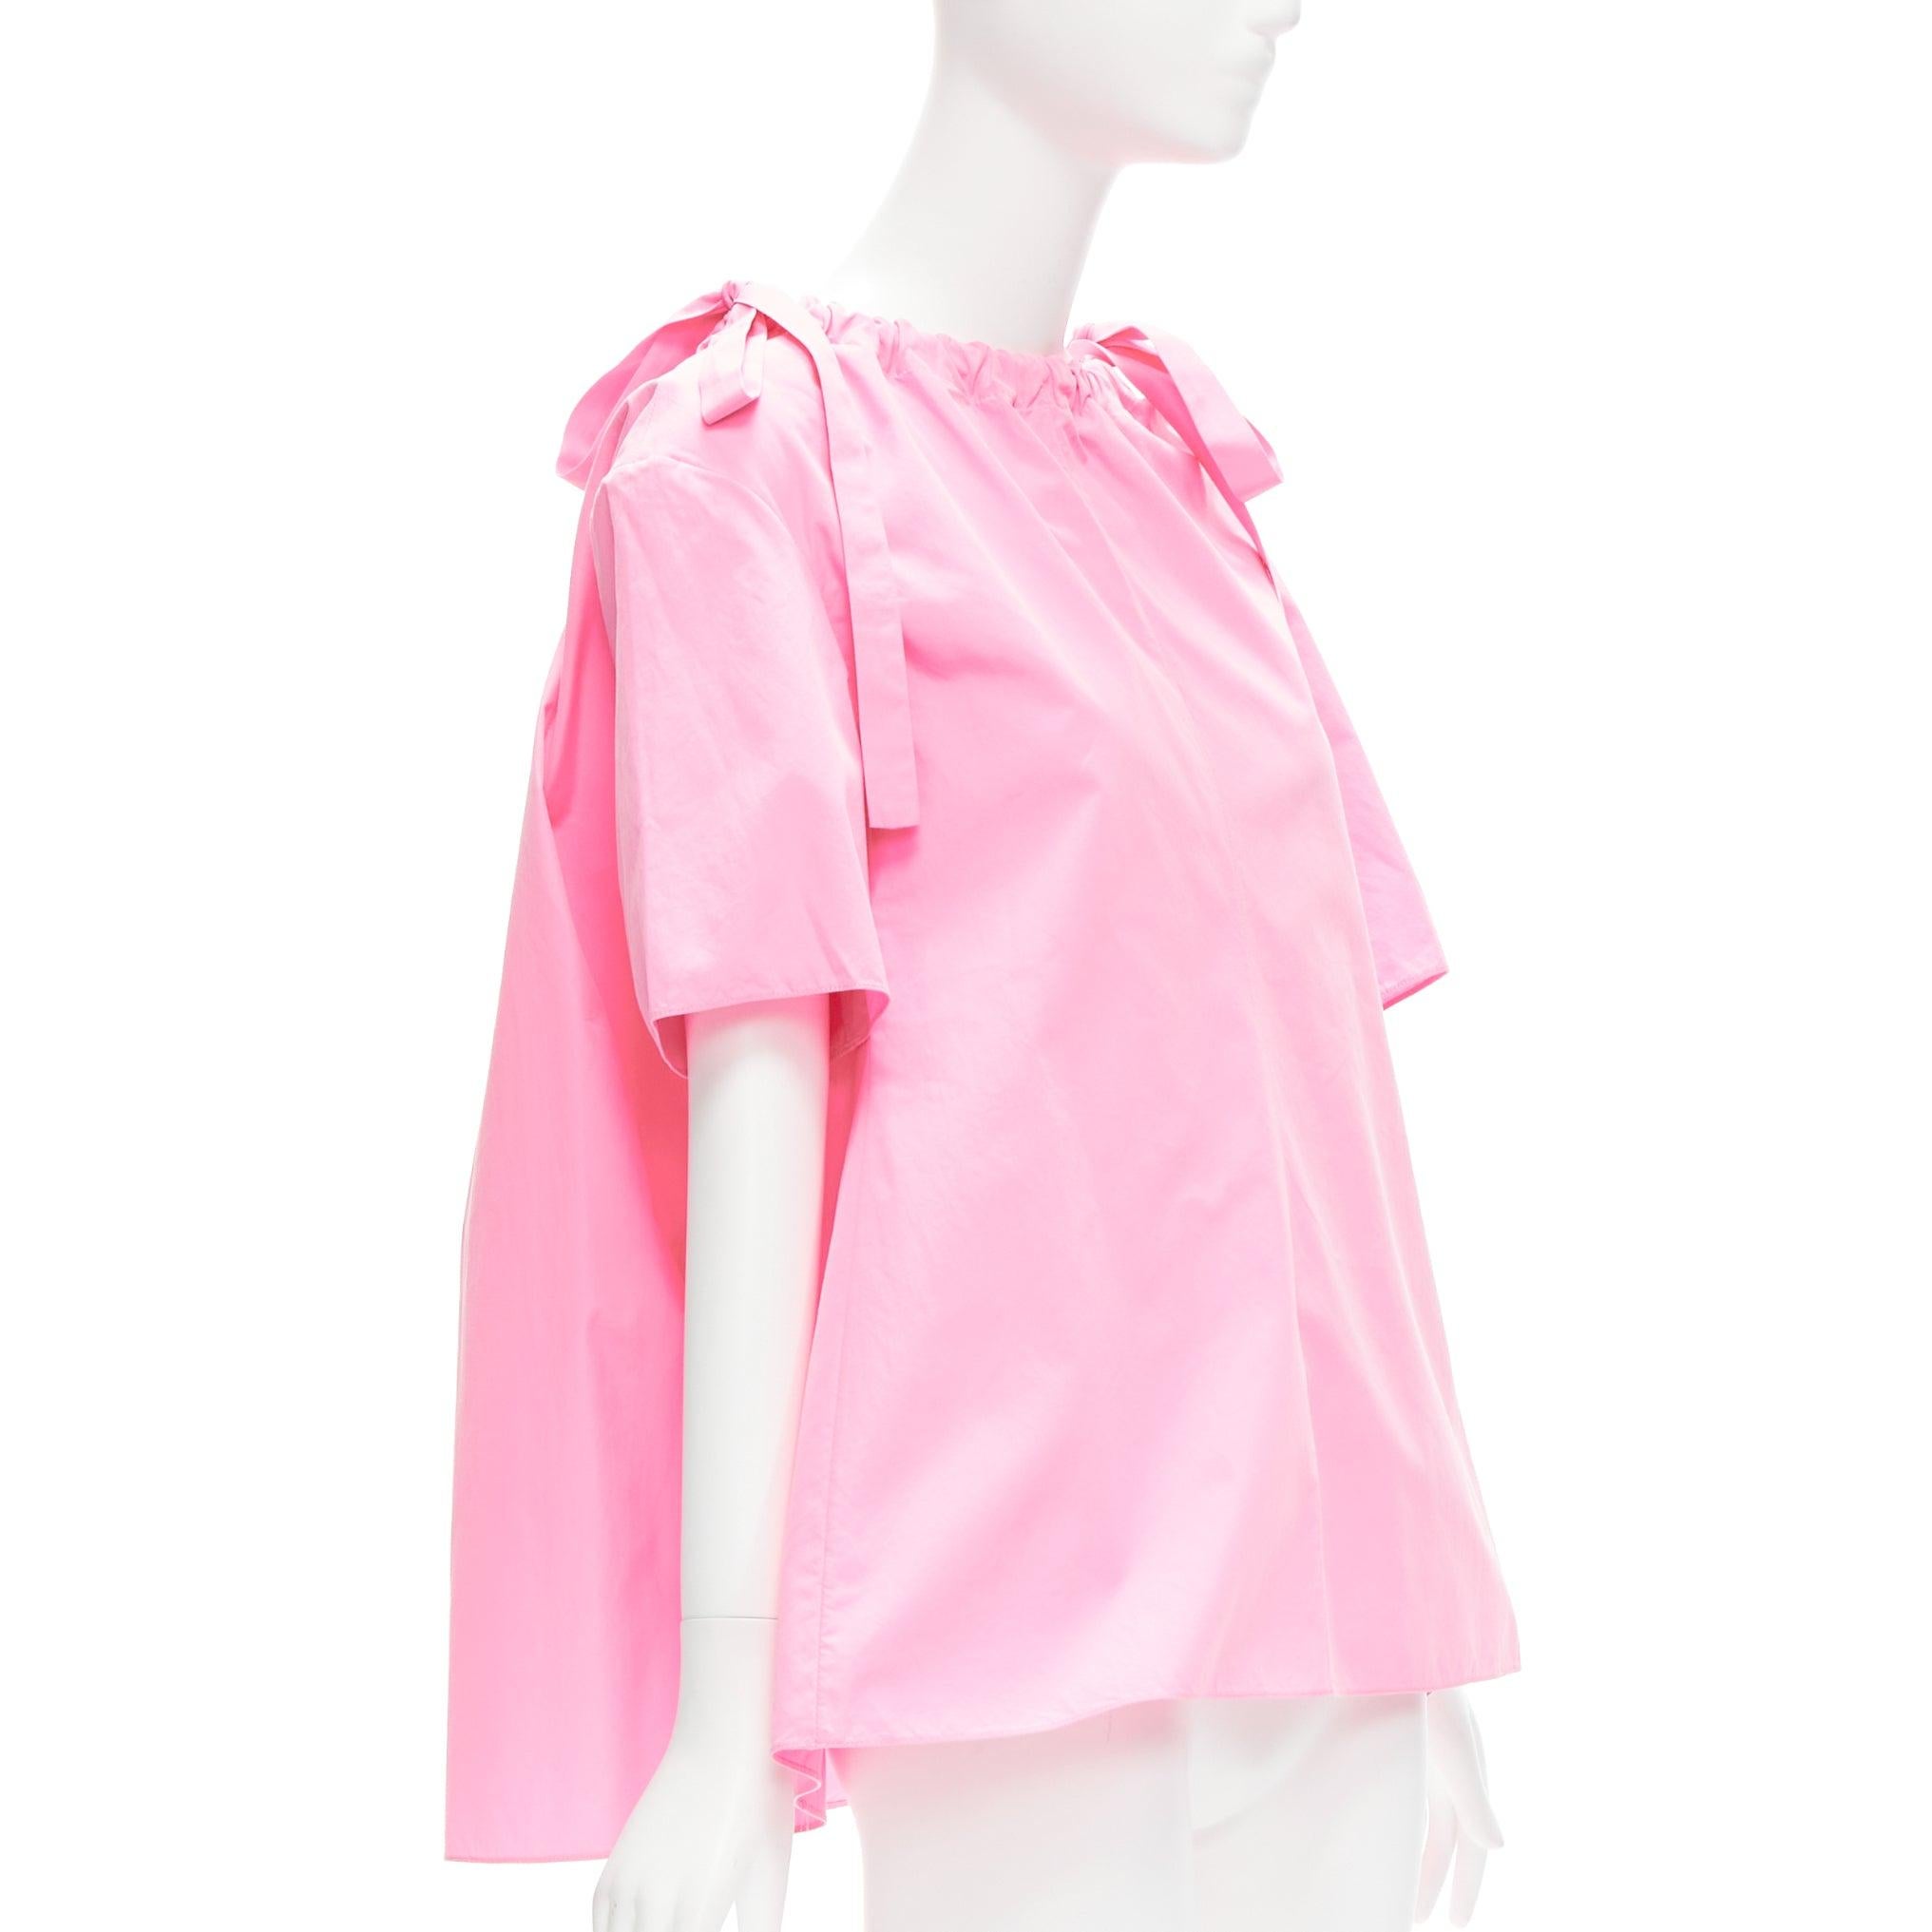 MARNI pink 100% cotton side drawstring collar trapeze top IT36 XXS
Reference: CELG/A00327
Brand: Marni
Material: Cotton
Color: Pink
Pattern: Solid
Closure: Drawstring
Extra Details: Drawstring collar design.
Made in: Italy

CONDITION:
Condition: